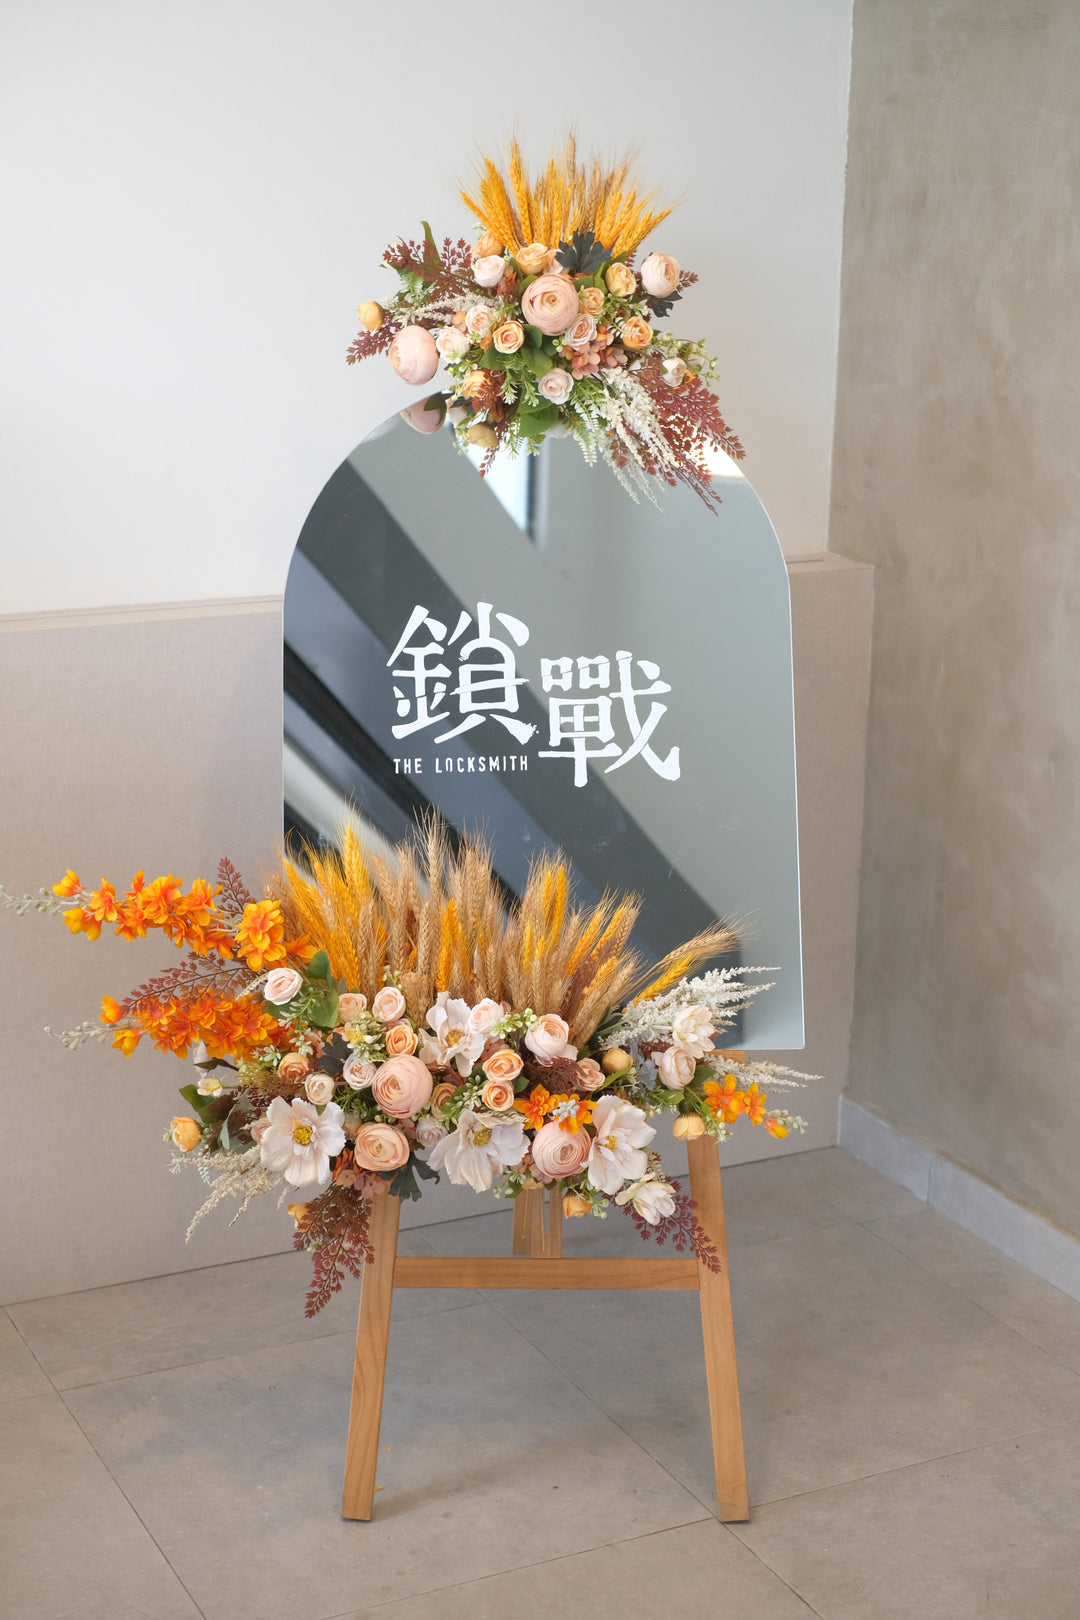 instagrammable Flower Frame Selfie Mirror for delivery in Penang.  Latest trend for shop opening gift.